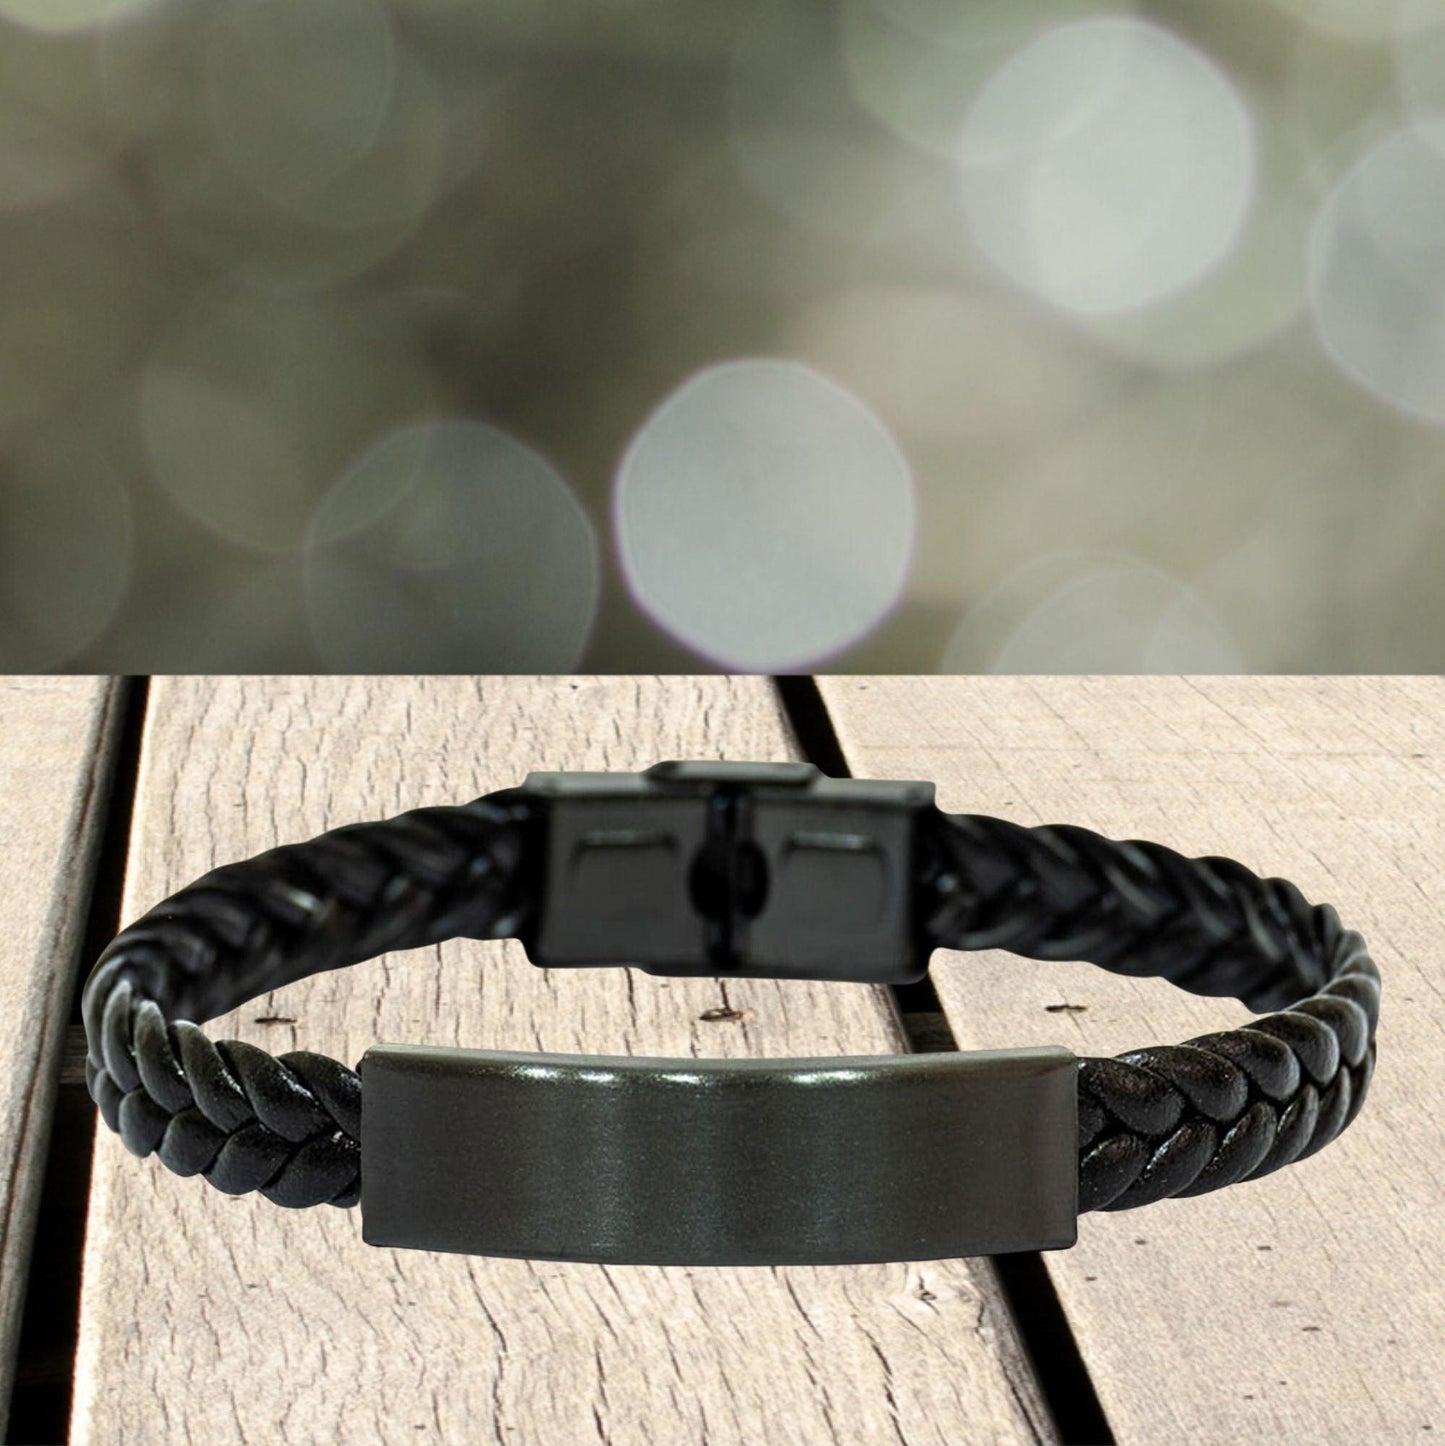 Remarkable Correctional Officer Gifts, Your dedication and hard work, Inspirational Birthday Christmas Unique Braided Leather Bracelet For Correctional Officer, Coworkers, Men, Women, Friends - Mallard Moon Gift Shop